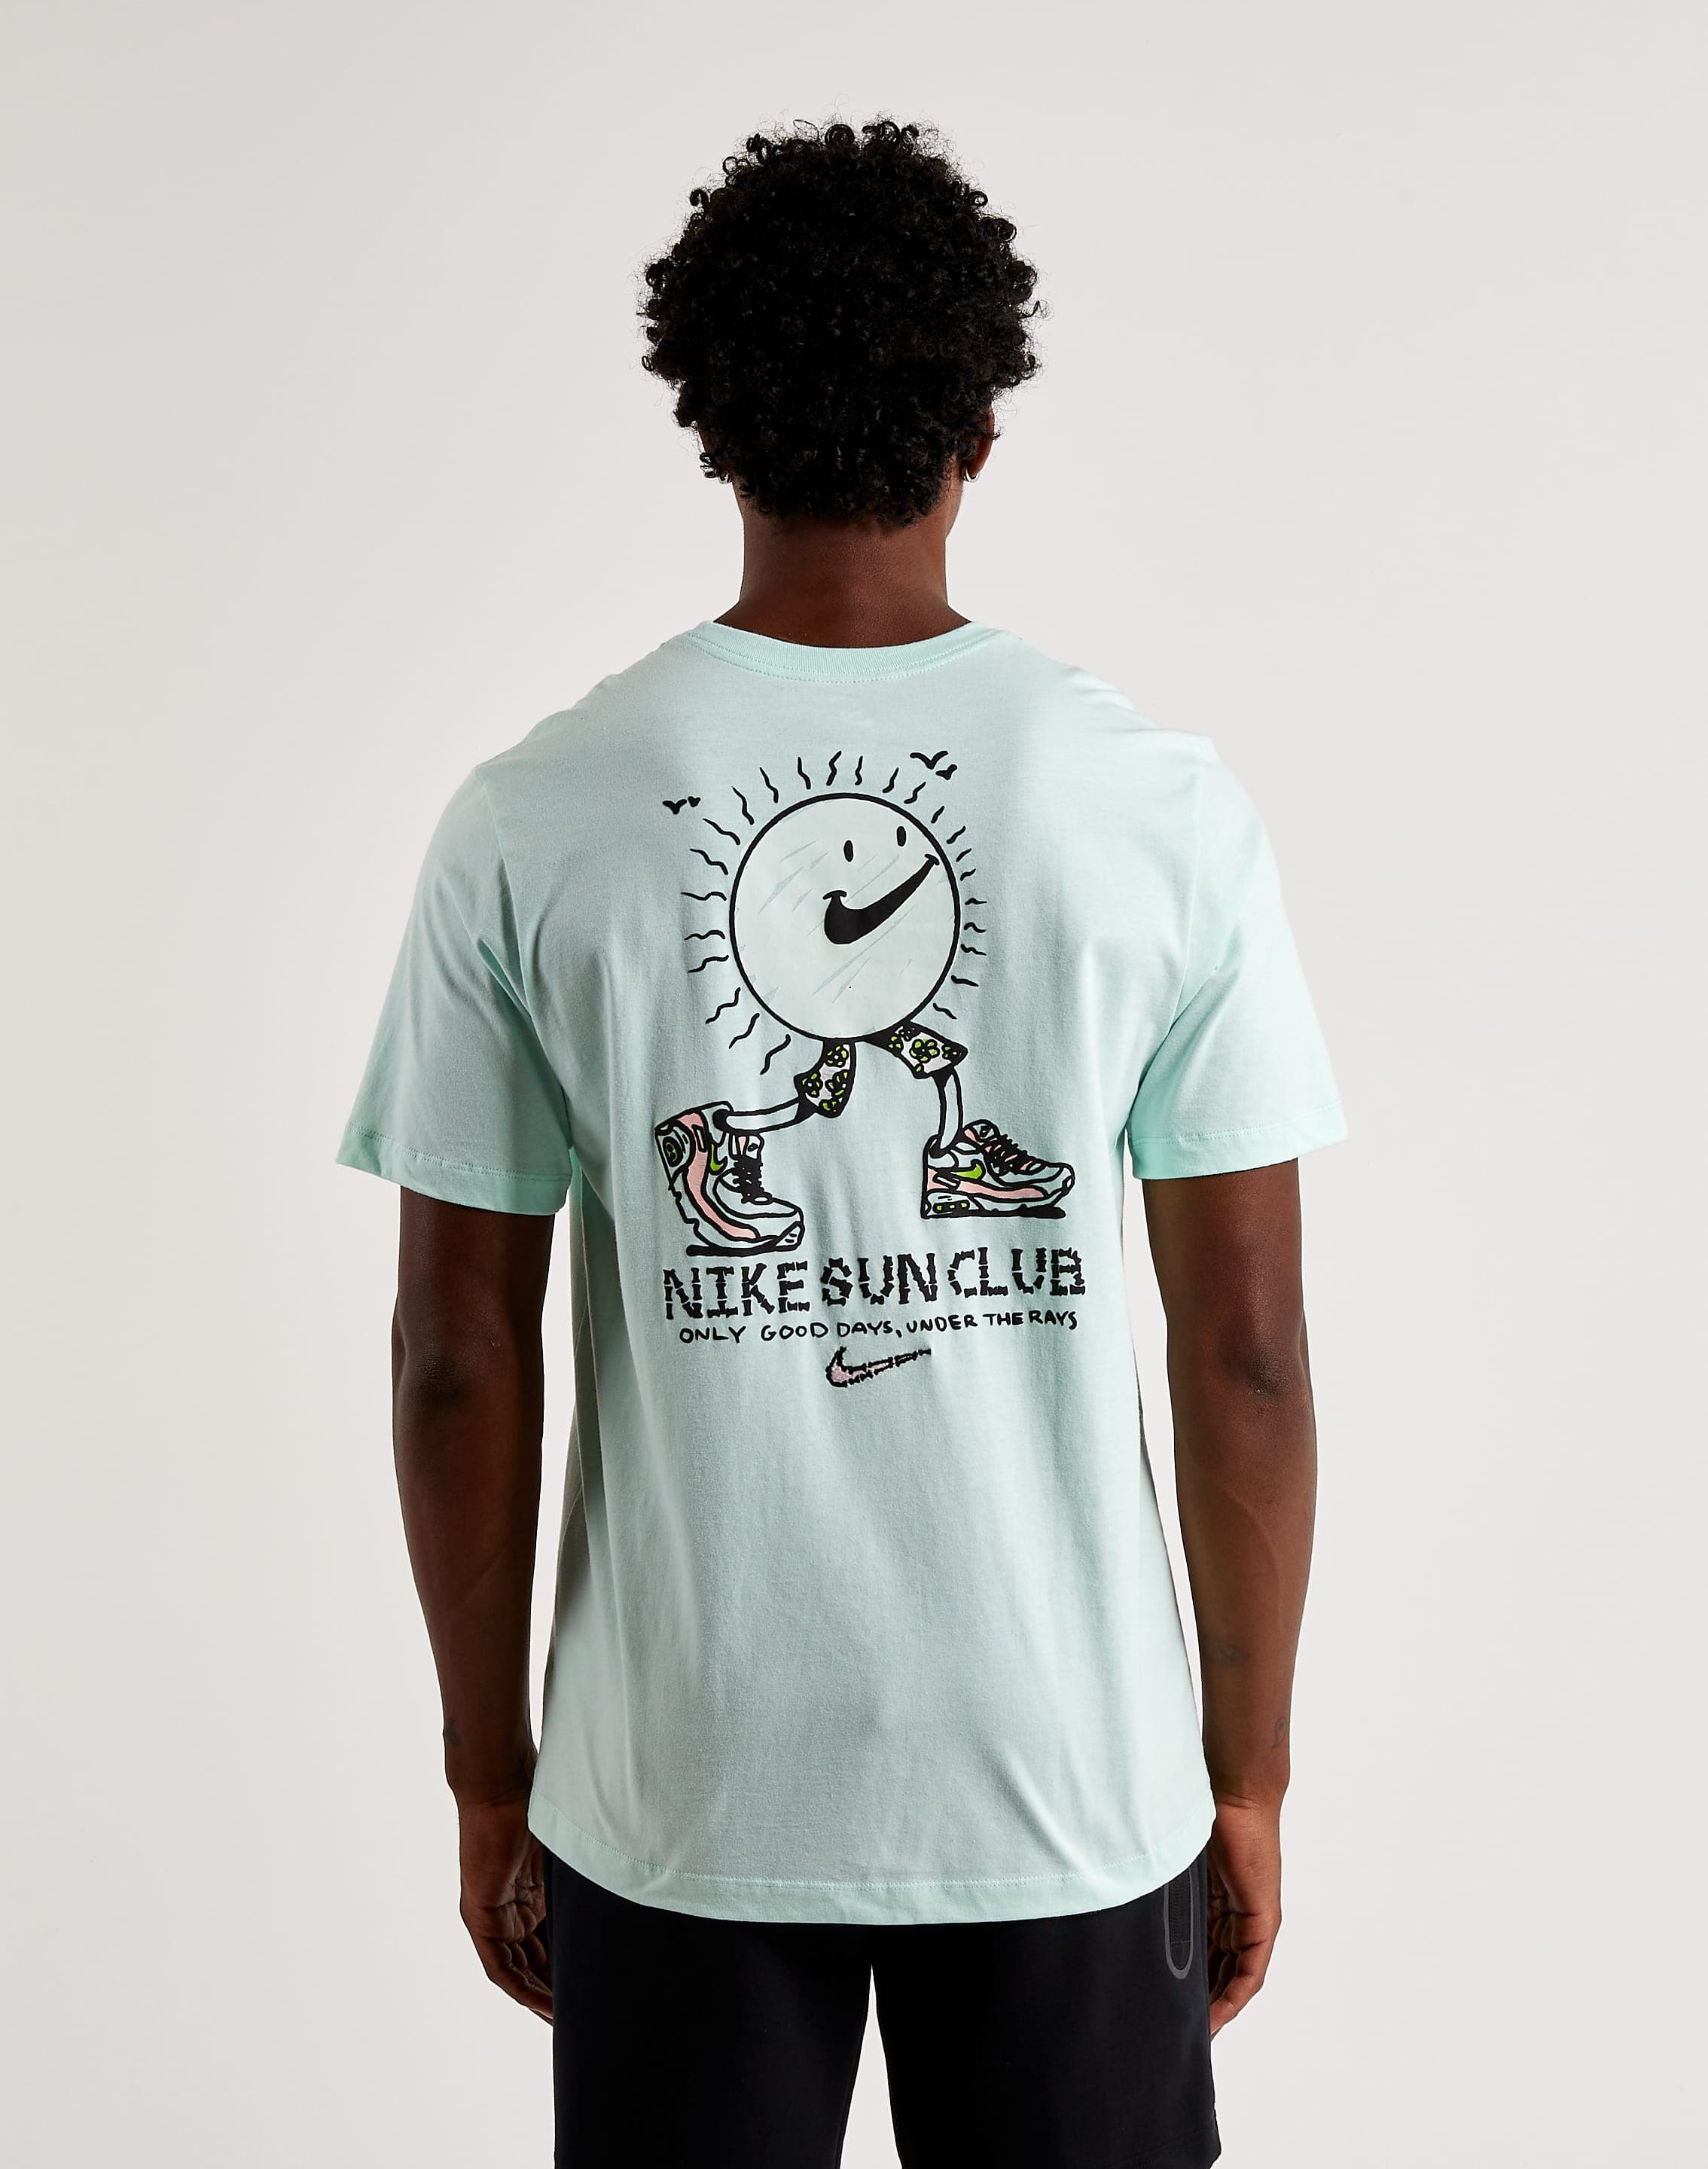 Nike Sun Club Only Good Days Under The Rays Shirt - Vintage & Classic Tee